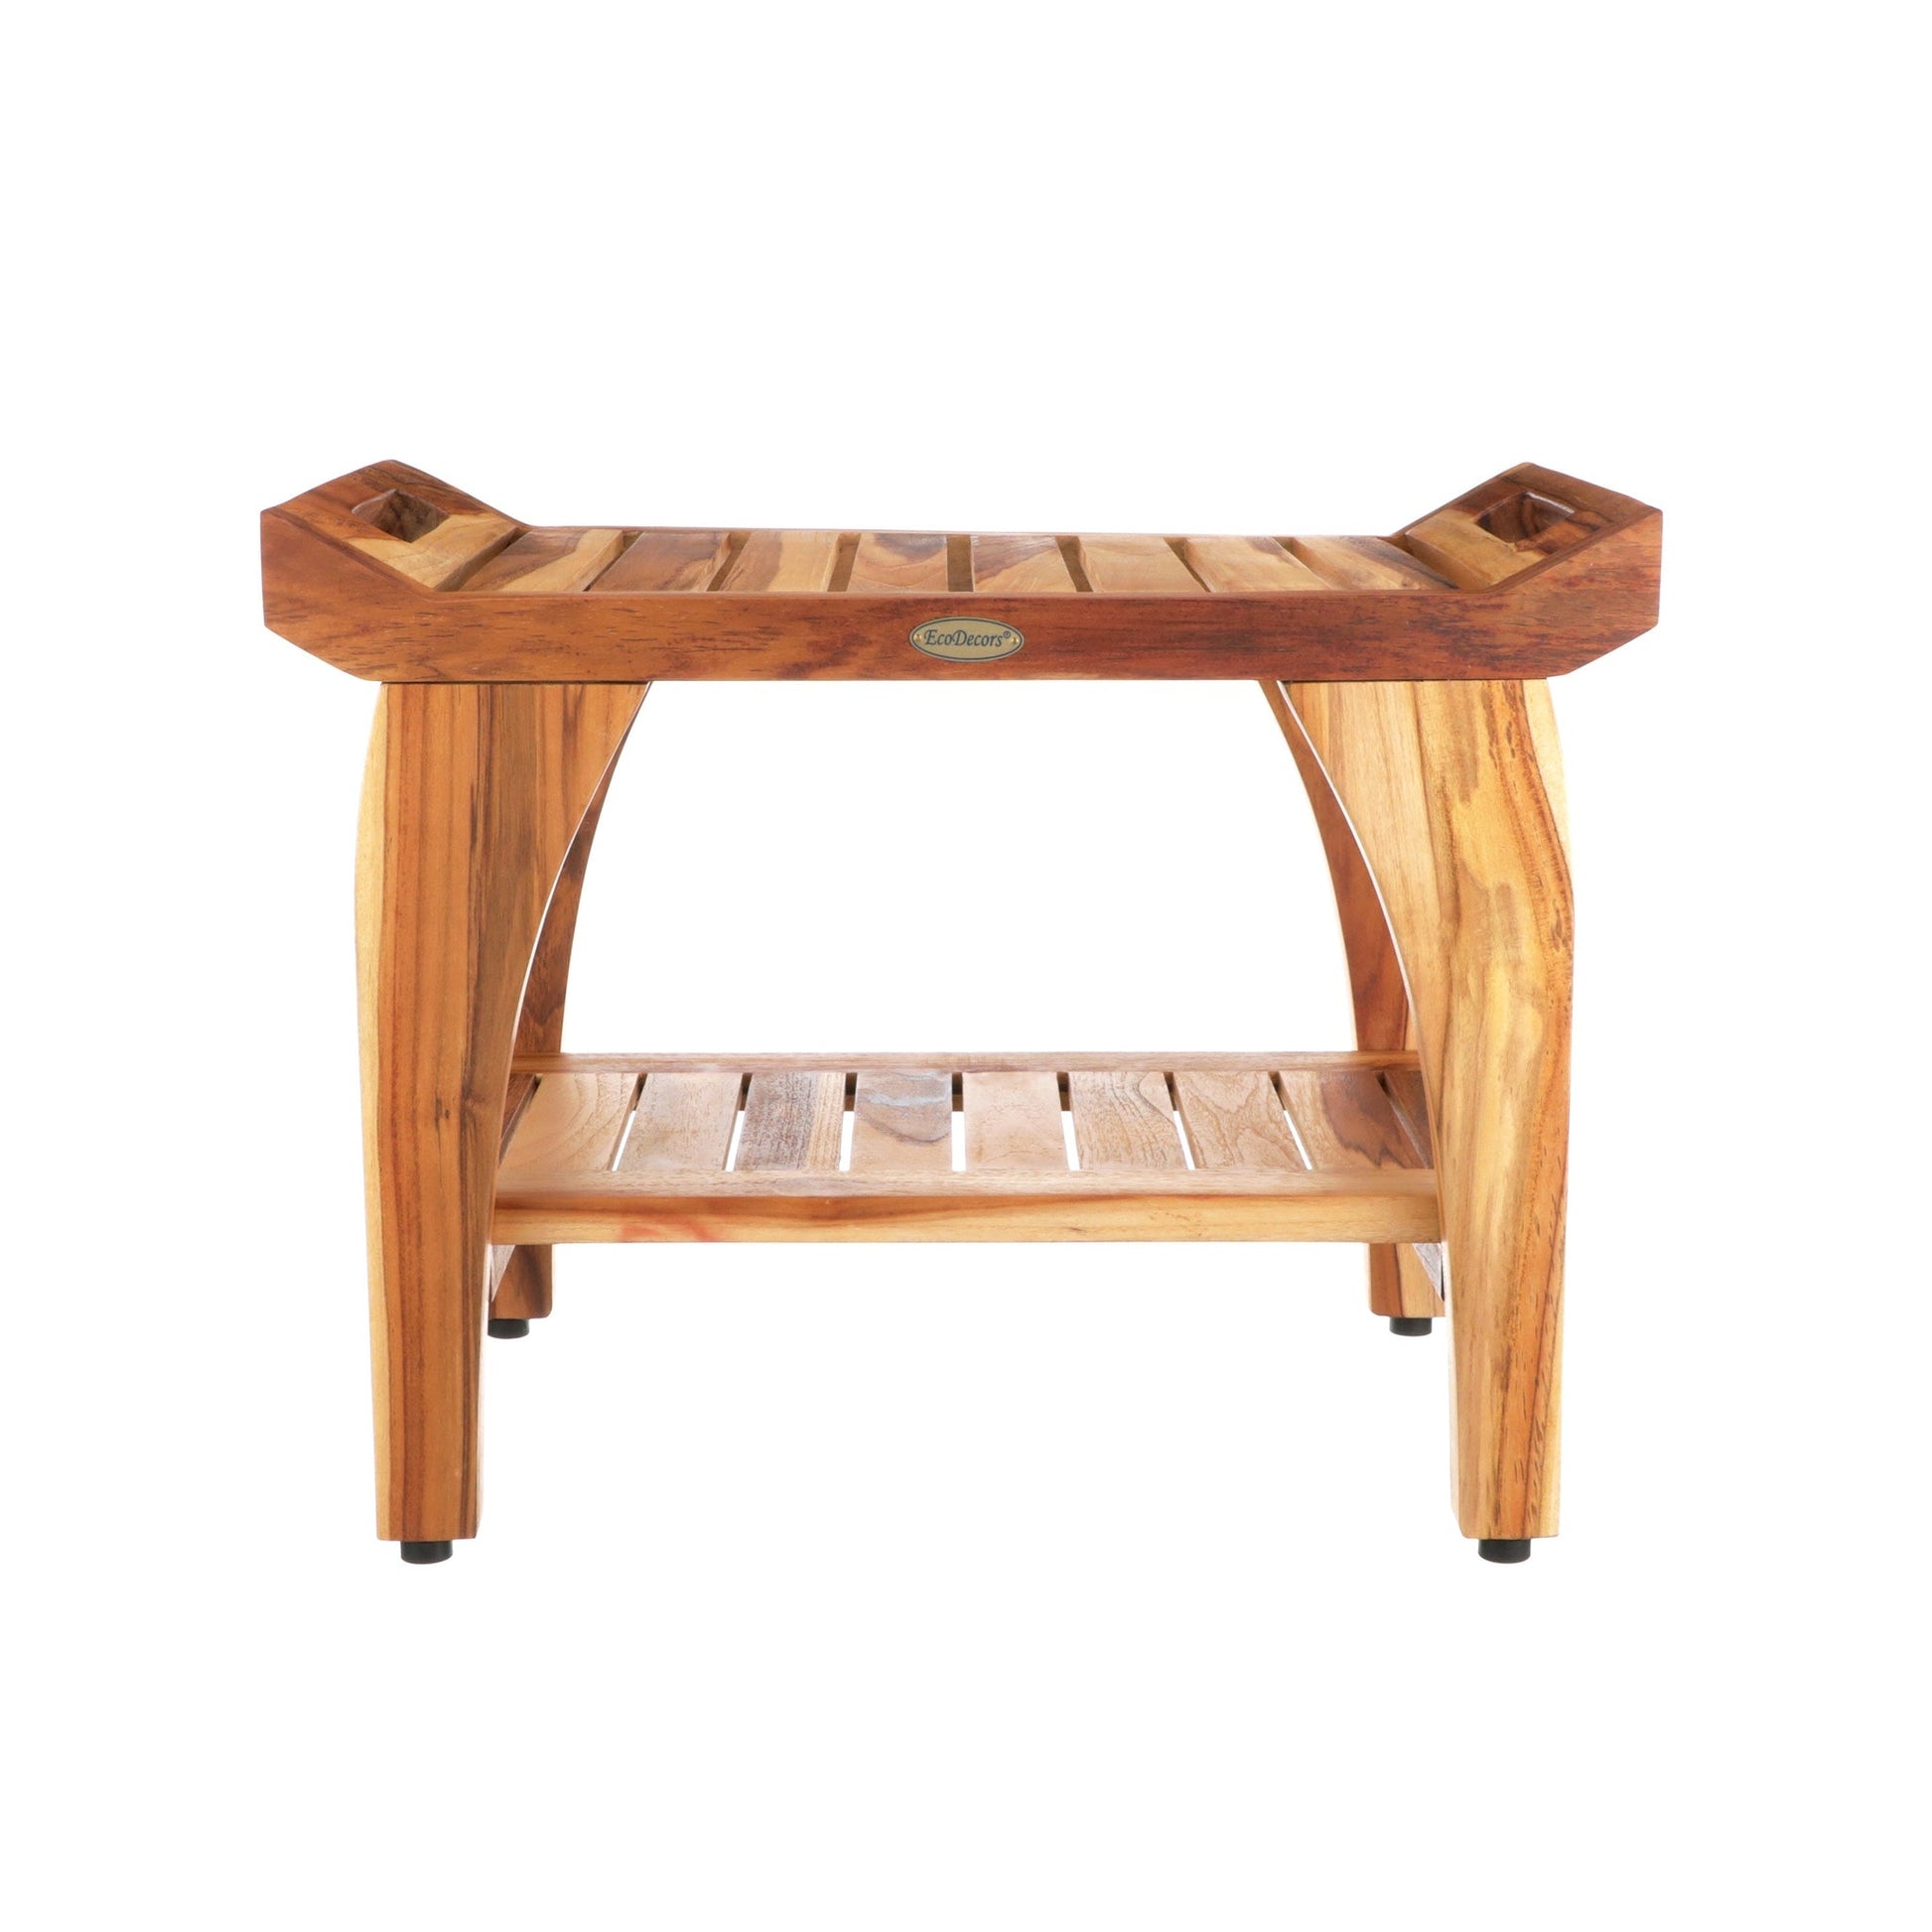 https://usbathstore.com/cdn/shop/files/EcoDecors-Tranquility-24-EarthyTeak-Solid-Teak-Wood-Shower-Bench-With-Shelf-and-LiftAide-Arms-3.jpg?v=1694729264&width=1946